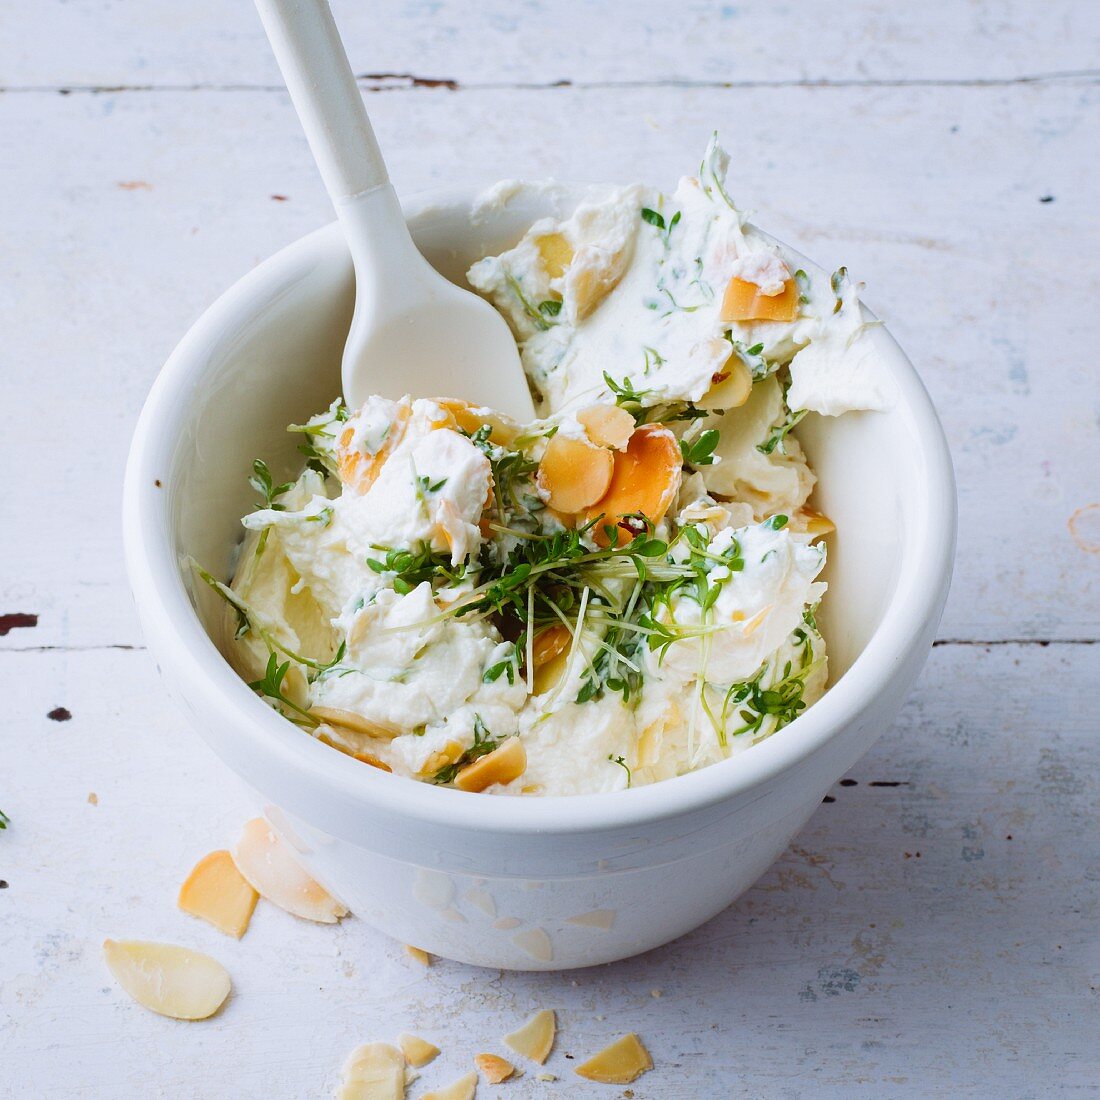 Vegetarian almond and cream cheese dip with yoghurt